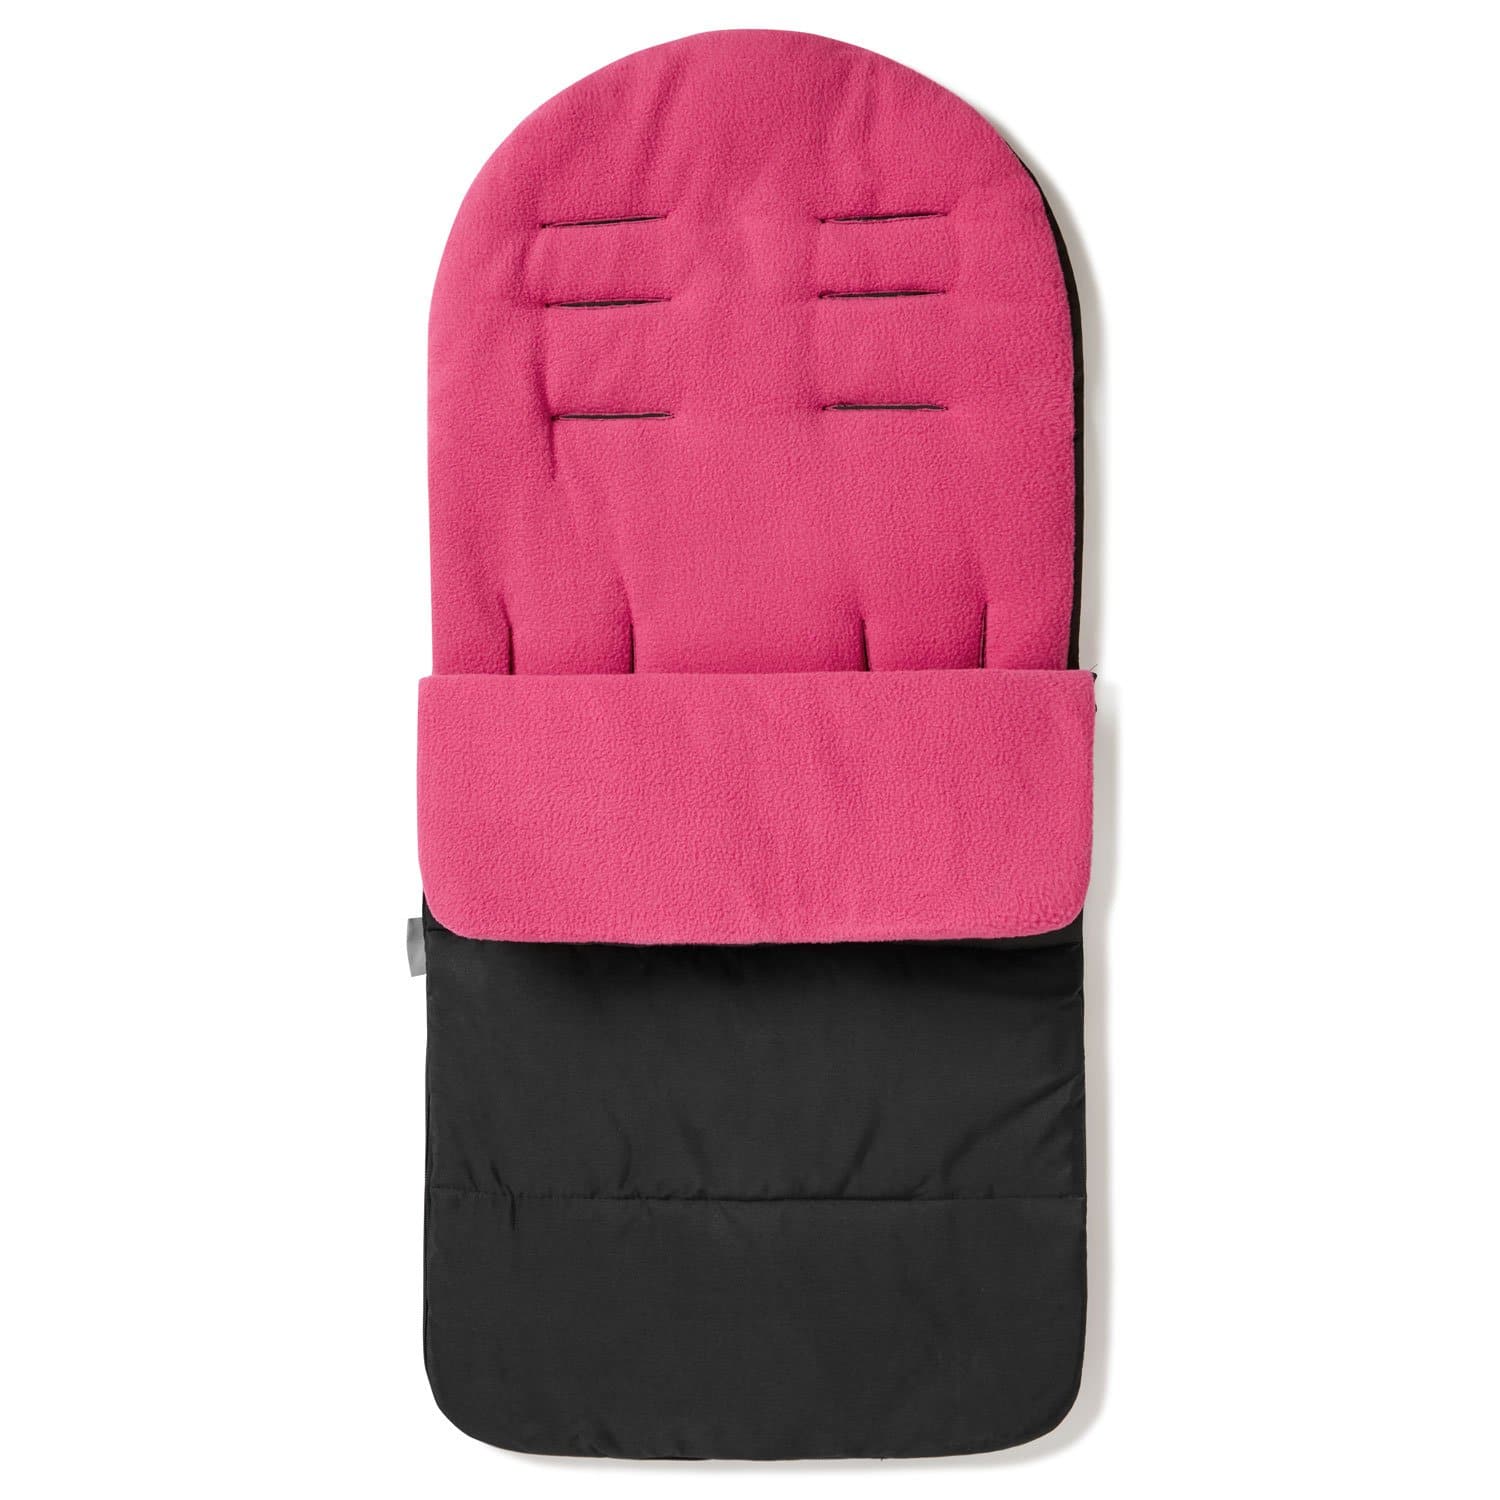 Premium Footmuff / Cosy Toes Compatible with My Babiie - For Your Little One